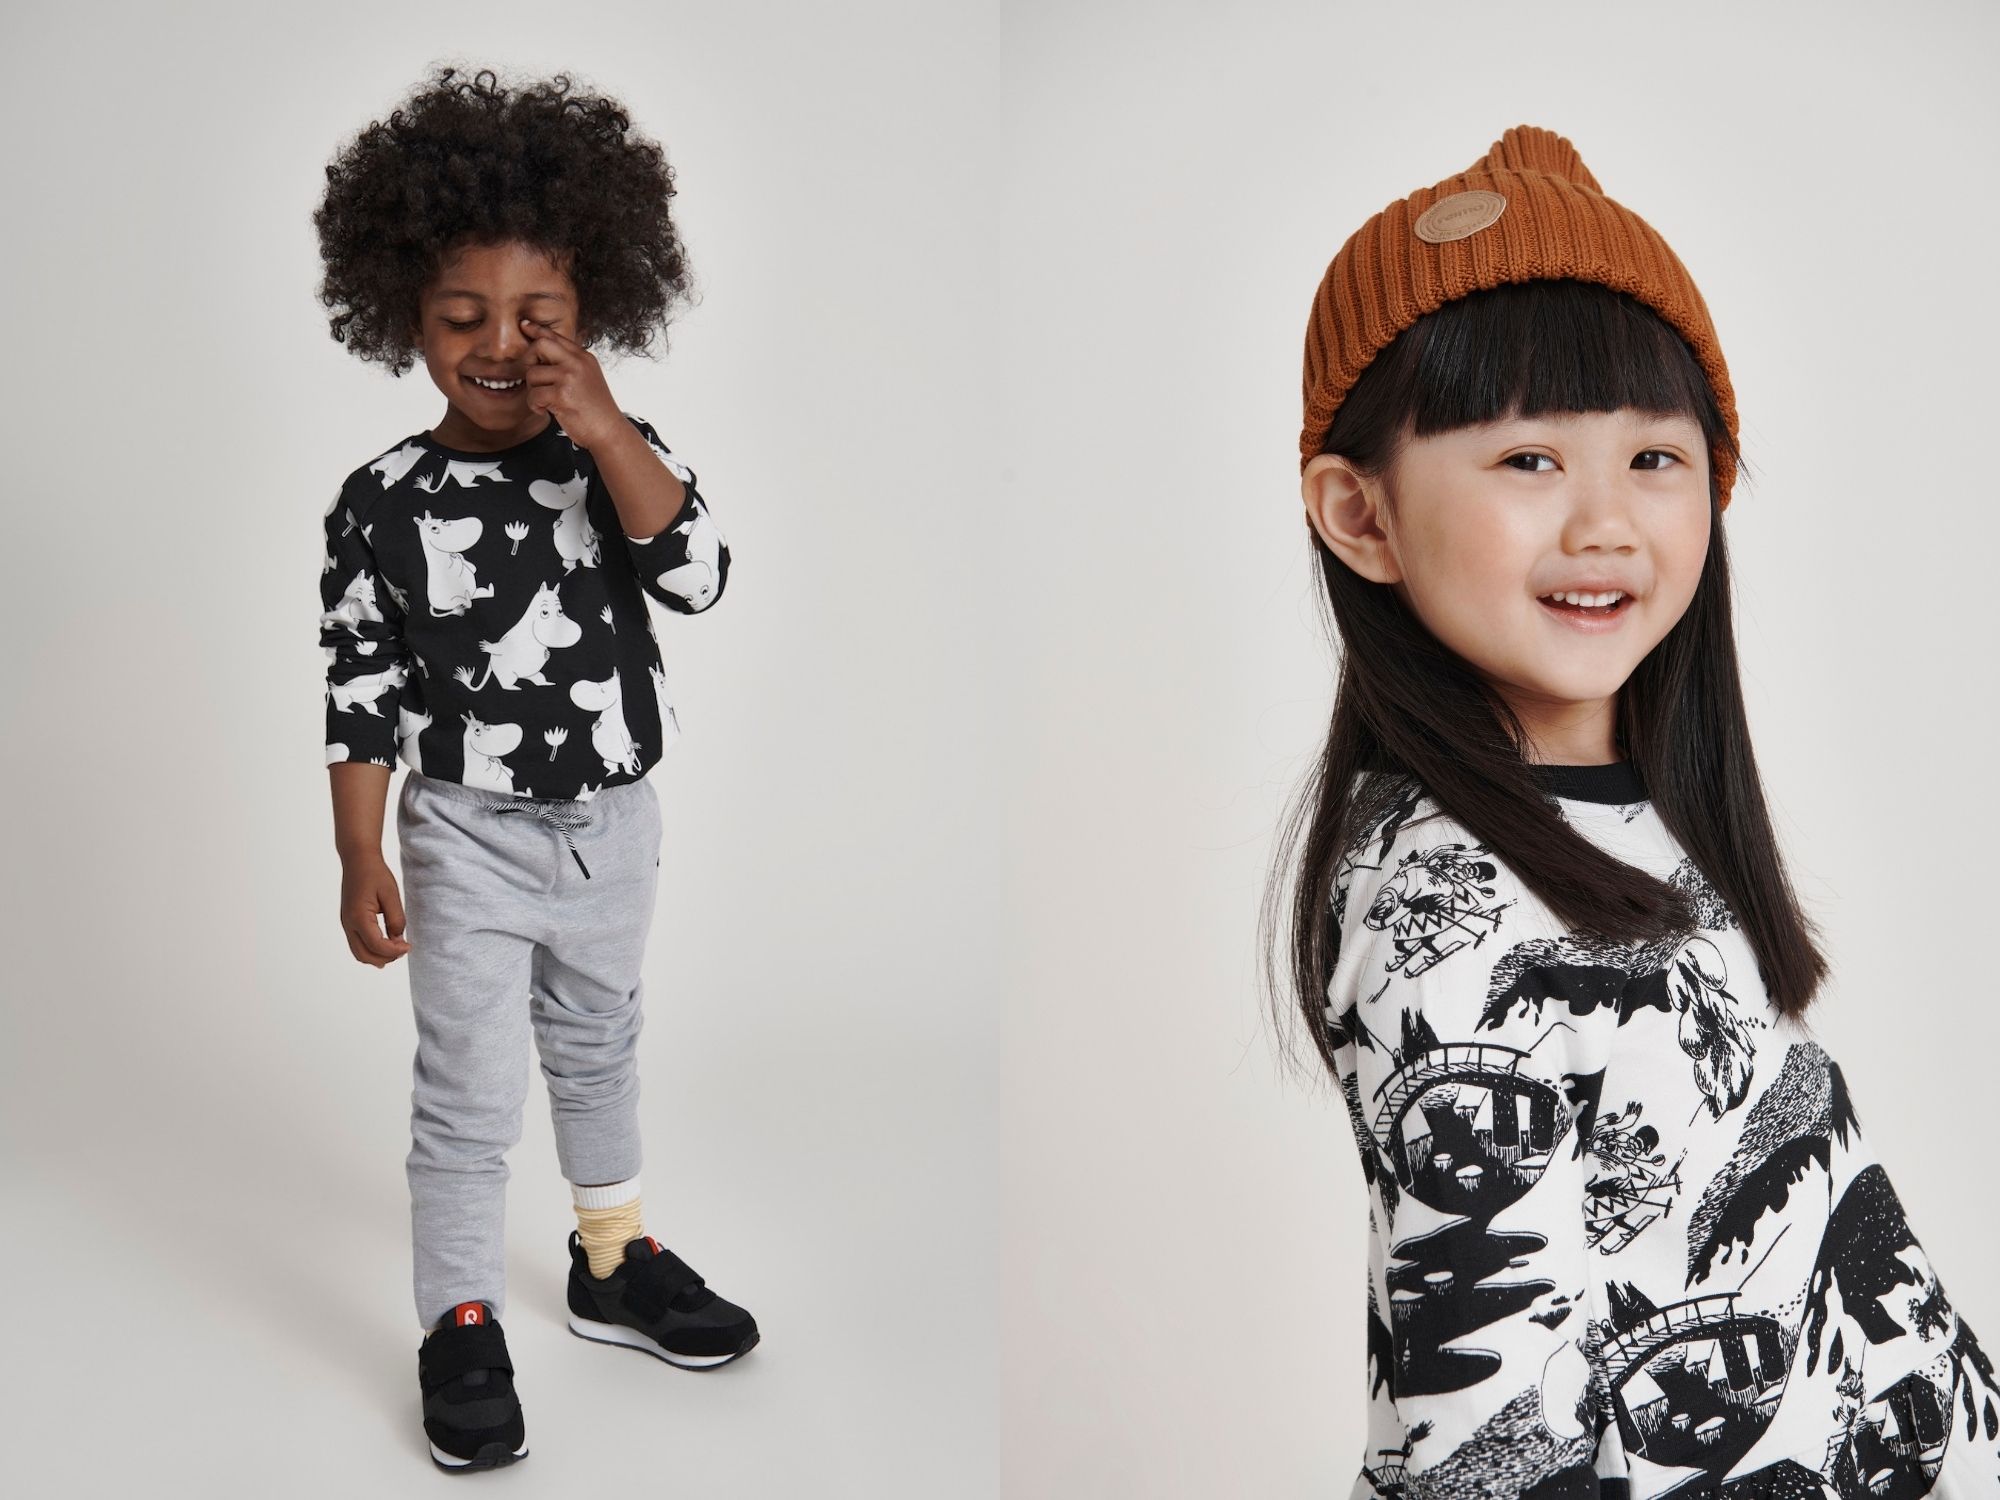 Equip little adventurers for every weather with Reima's Moomin collection